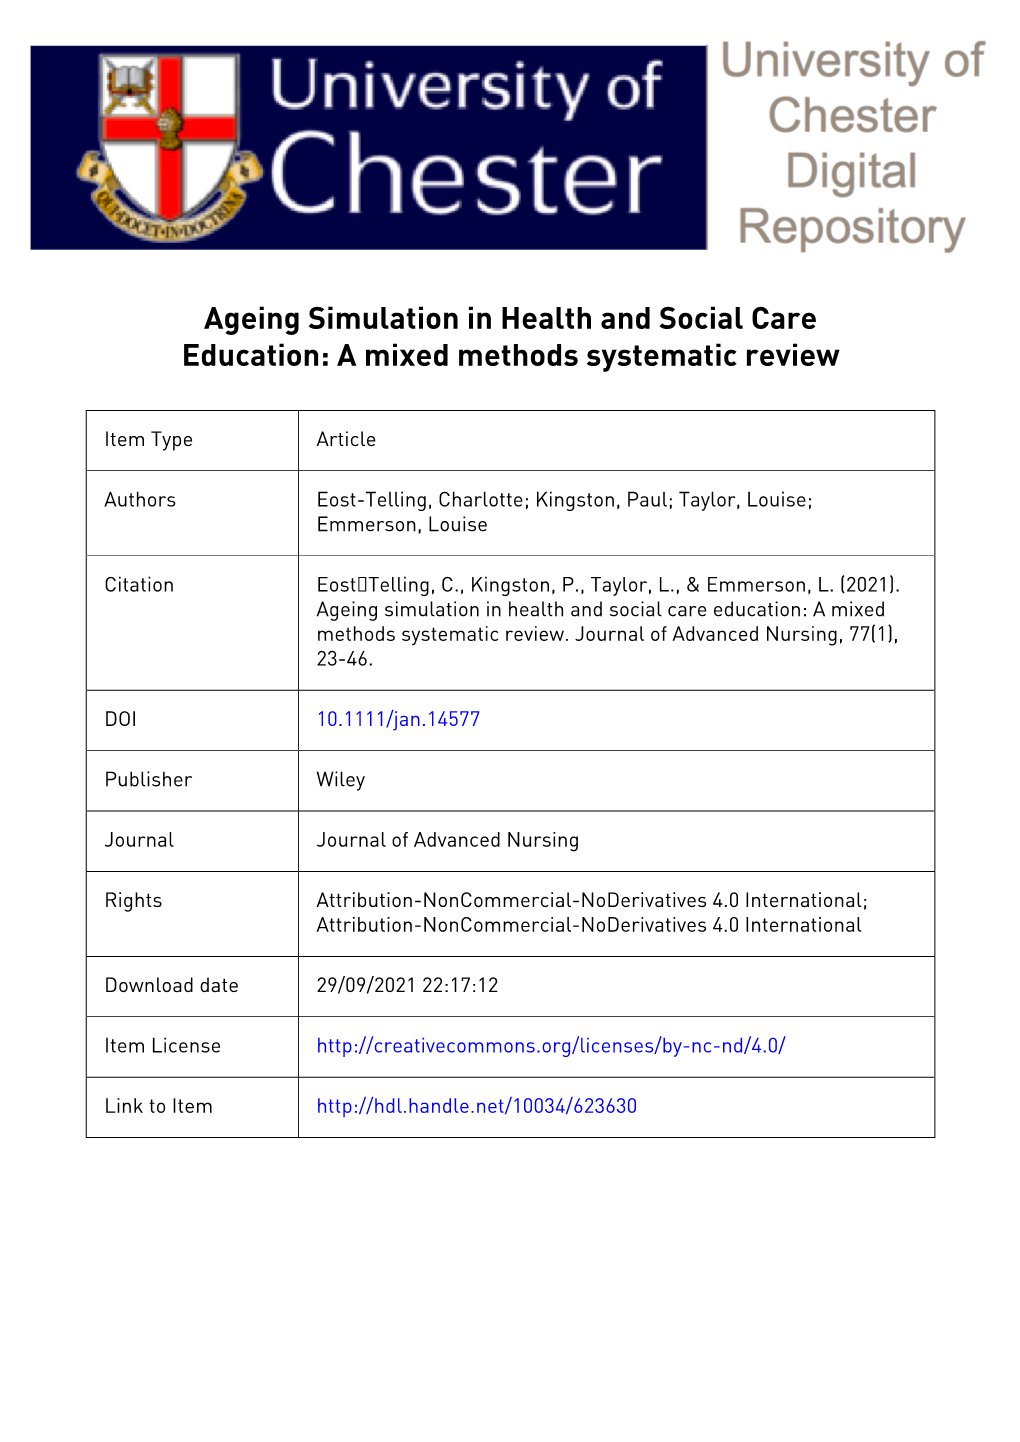 Ageing Simulation in Health and Social Care Education: a Mixed Methods Systematic Review